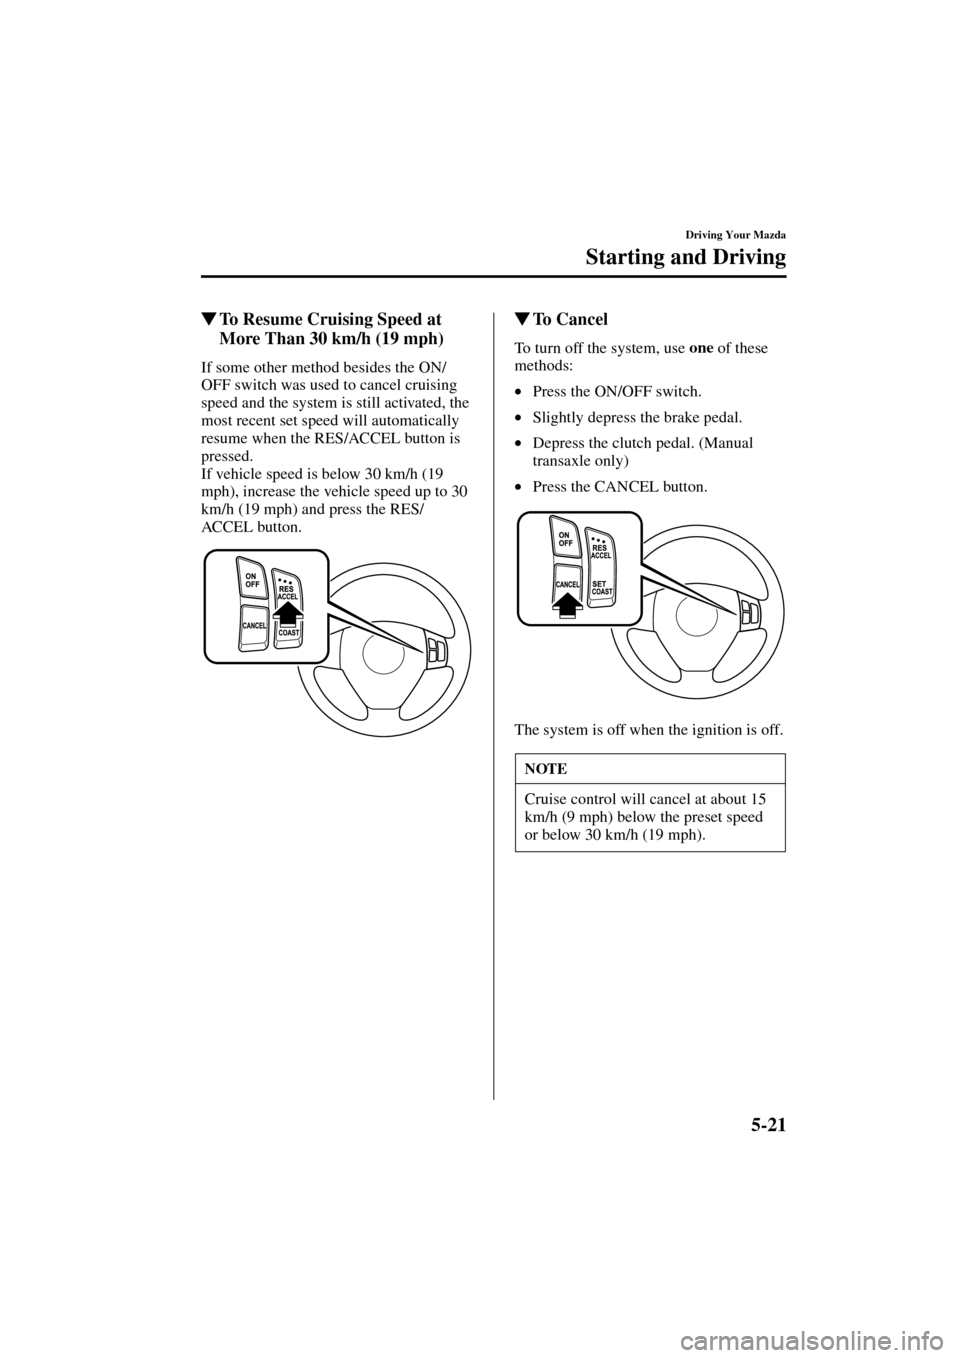 MAZDA MODEL 3 HATCHBACK 2004  Owners Manual (in English) 5-21
Driving Your Mazda
Starting and Driving
Form No. 8S18-EA-03I
To Resume Cruising Speed at 
More Than 30 km/h (19 mph)
If some other method besides the ON/
OFF switch was used to cancel cruising 
